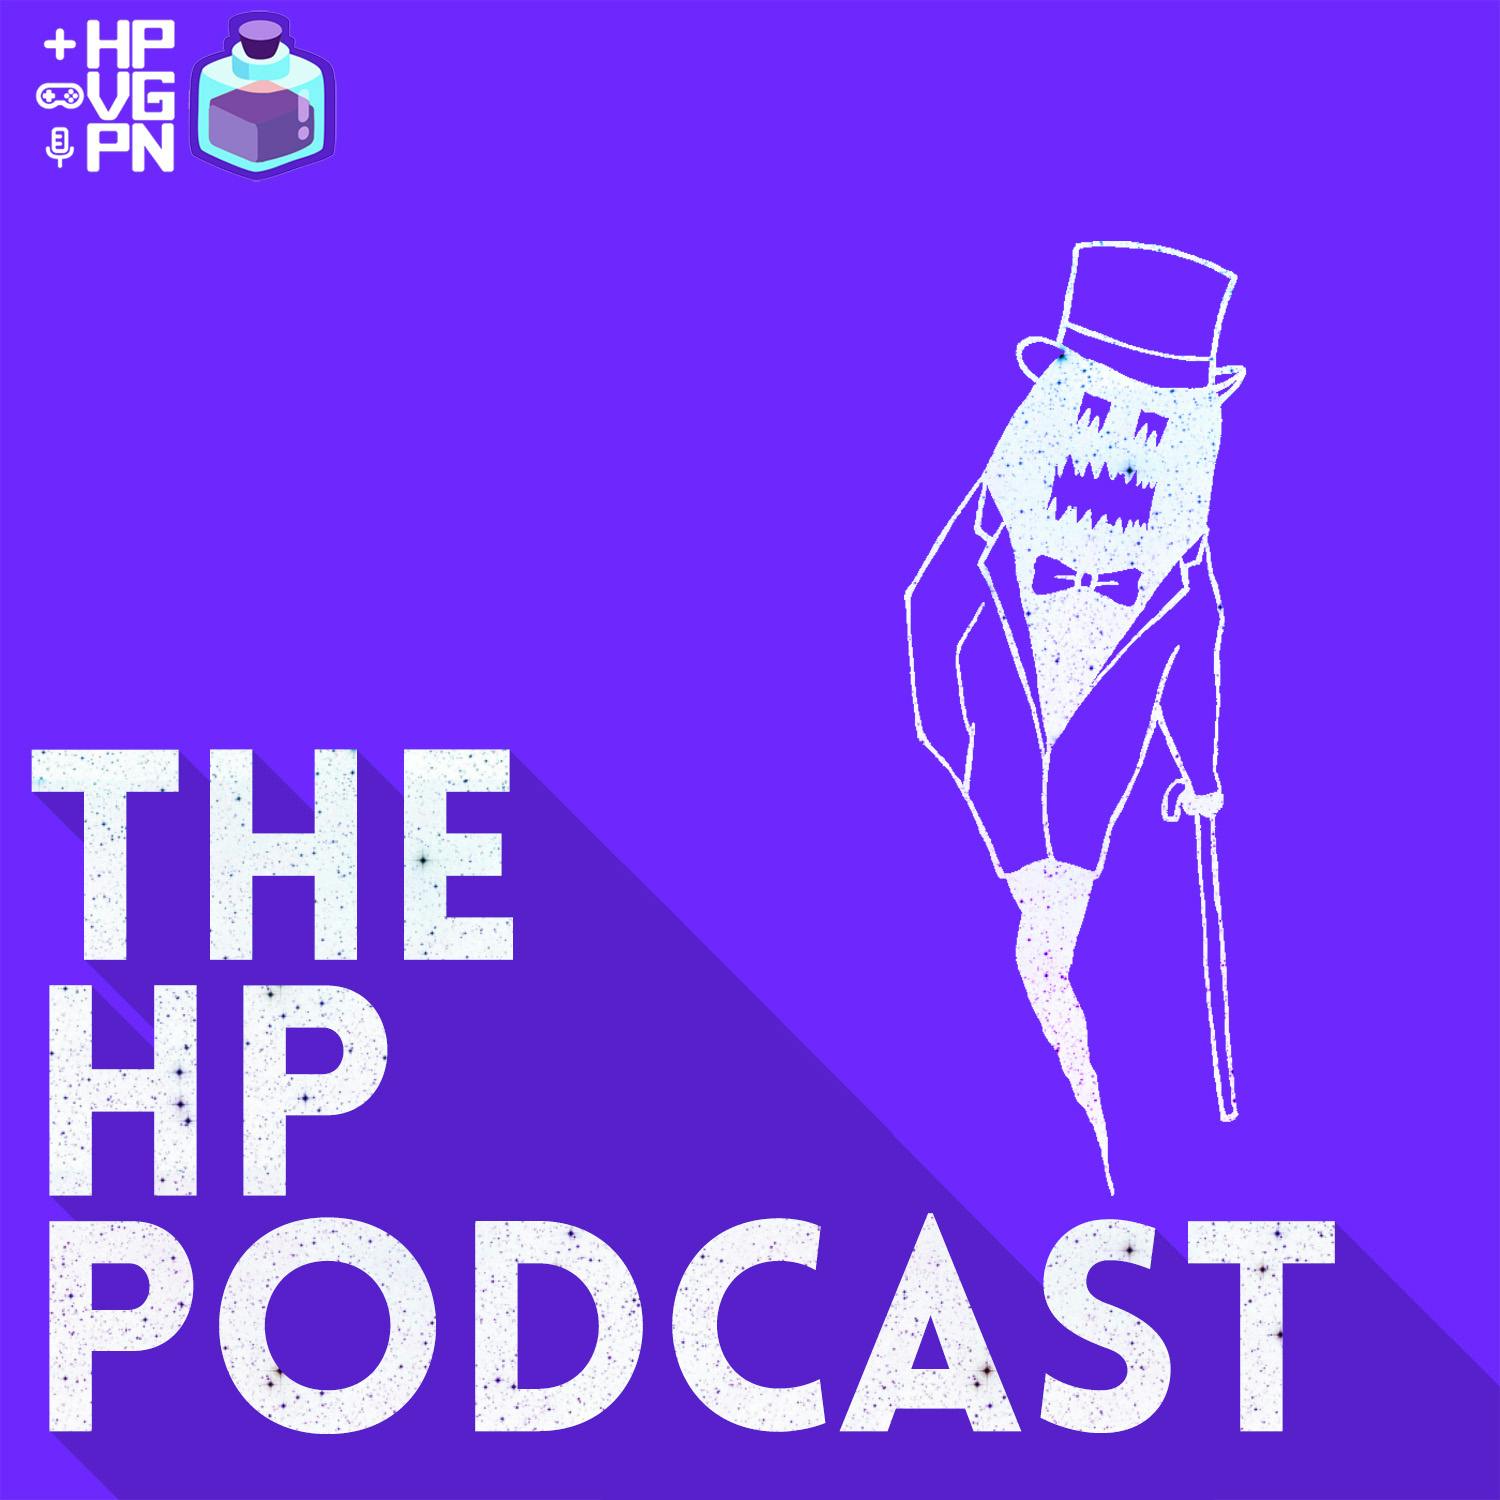 Nintendo Switch Sales Dominated 2020 - The HP Podcast Episode 105